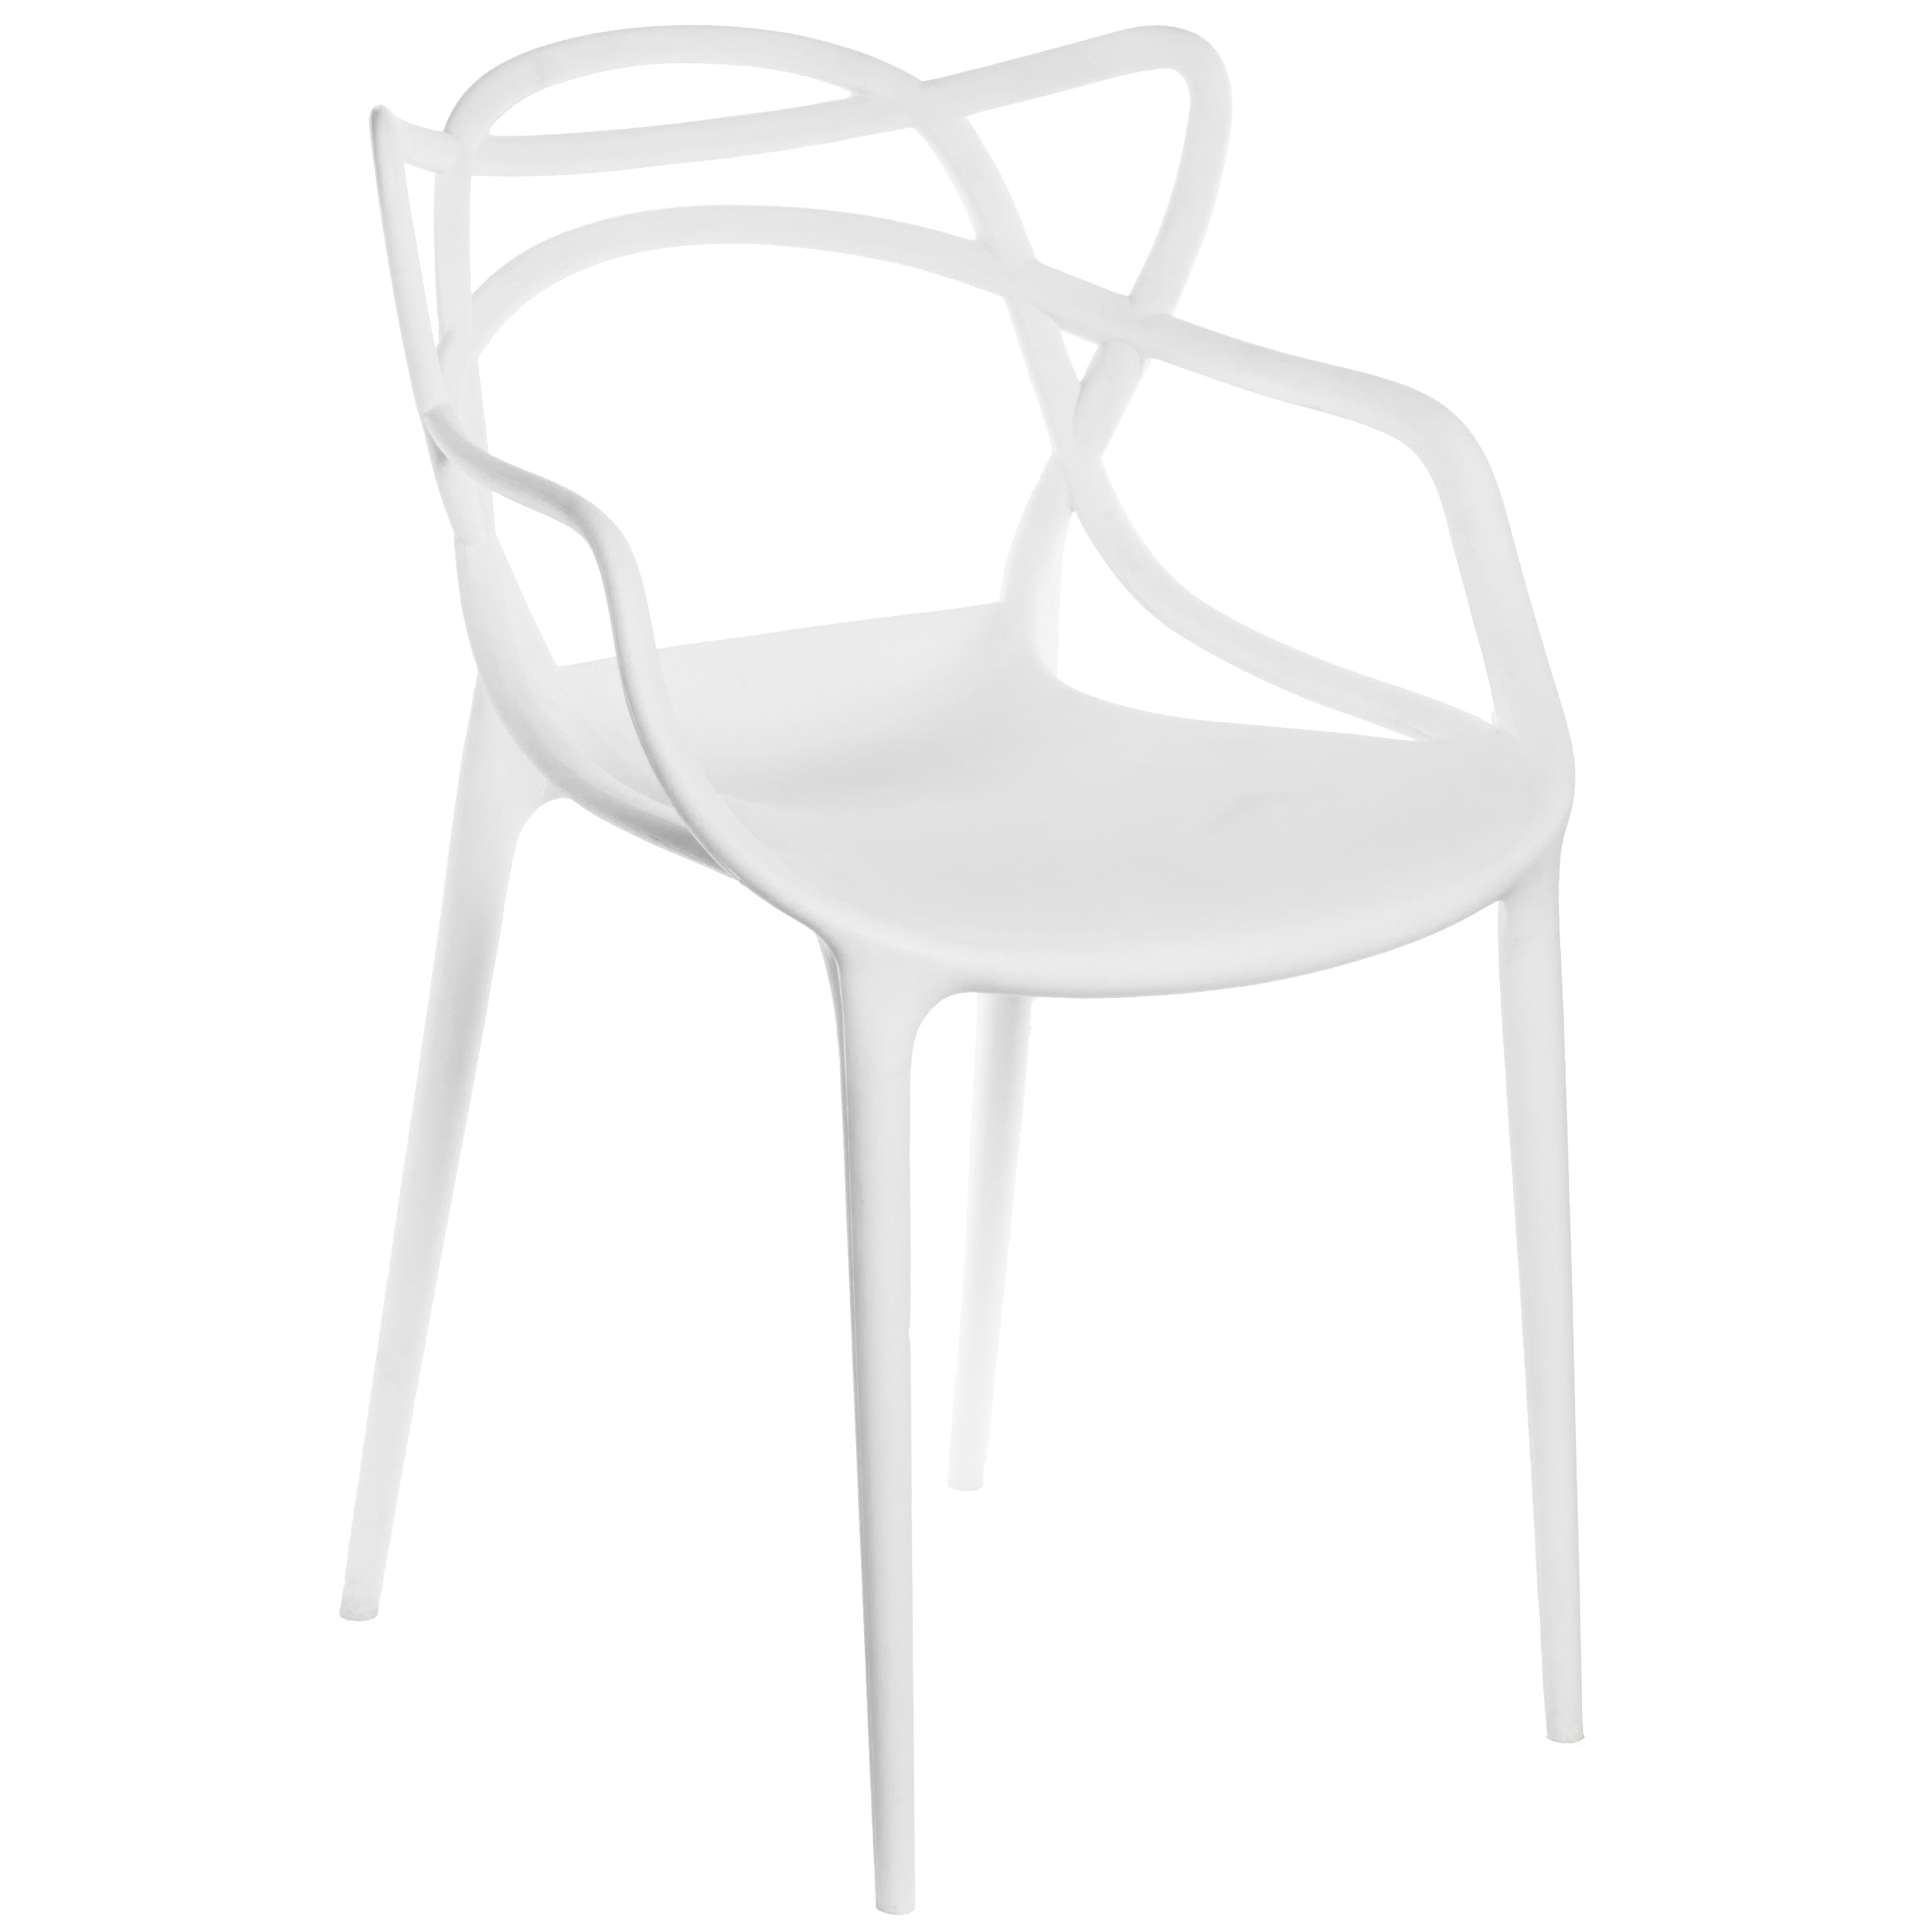 Mid-Century Modern Style Stackable Plastic Molded Arm Chair With Entangled Open Back - White Single